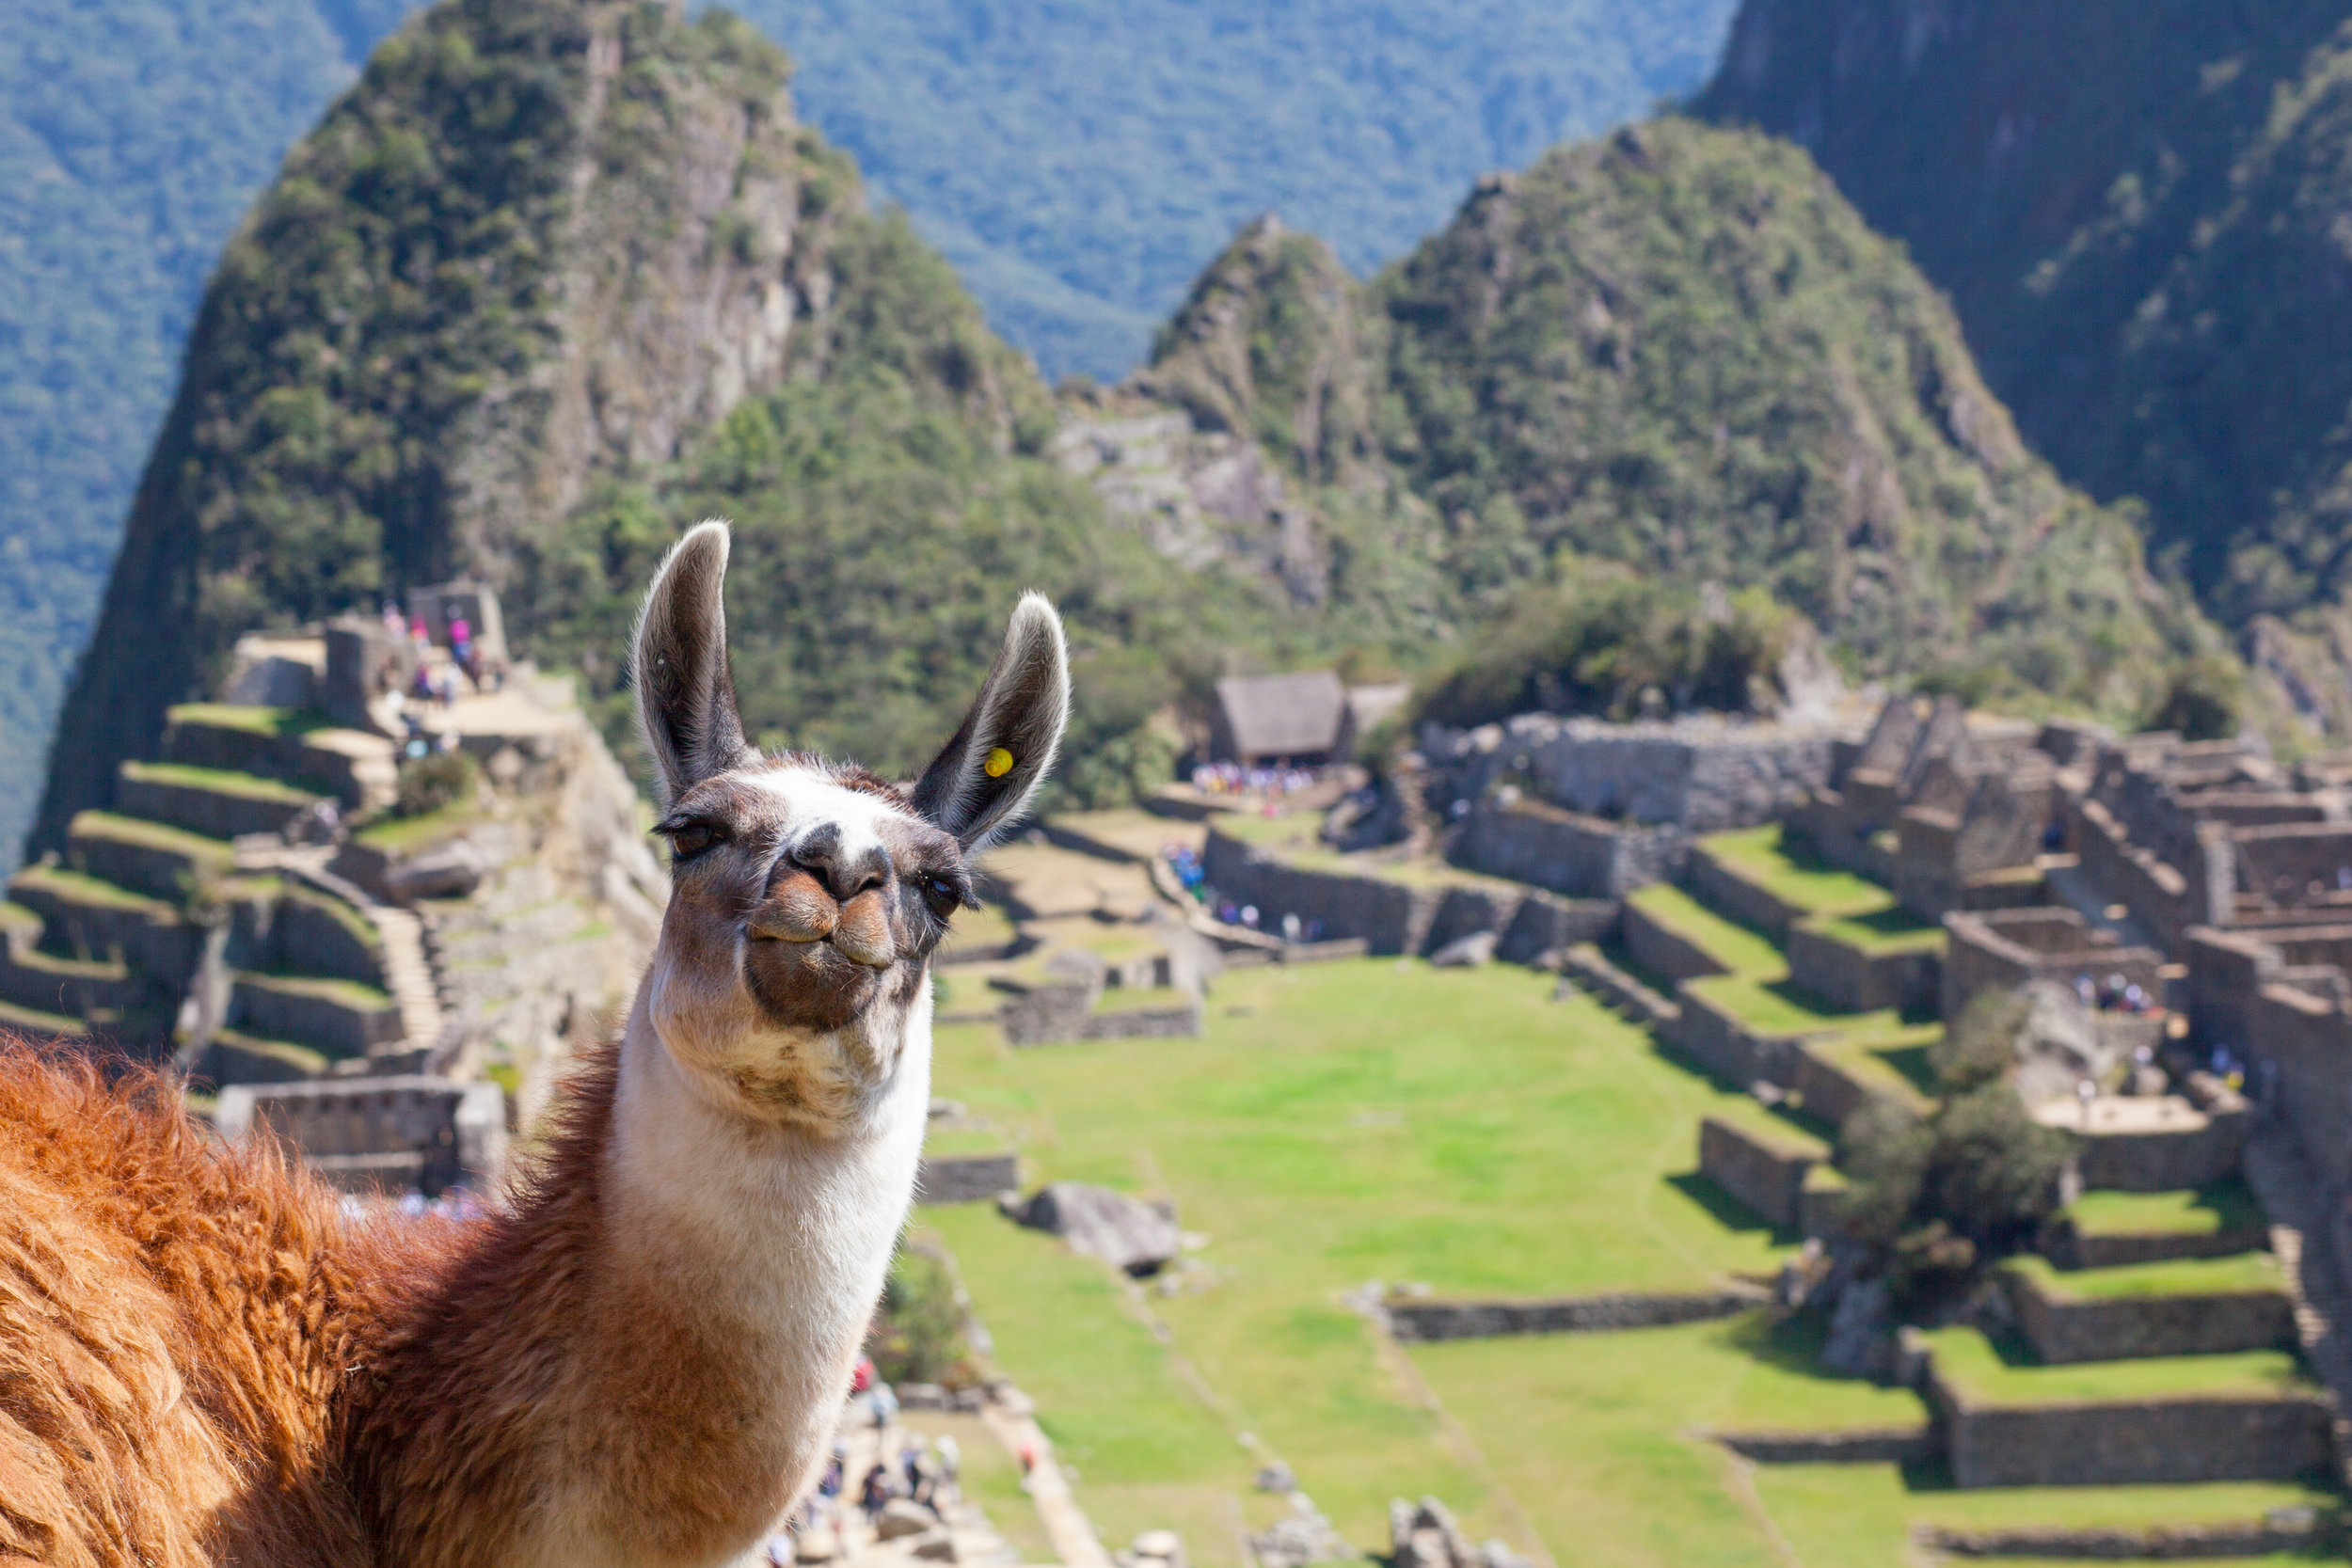 This image of a friendly llama at Machu Picchu is a frequent seller on Getty.  It is also the image of mine that has been stolen most and used illegally online.